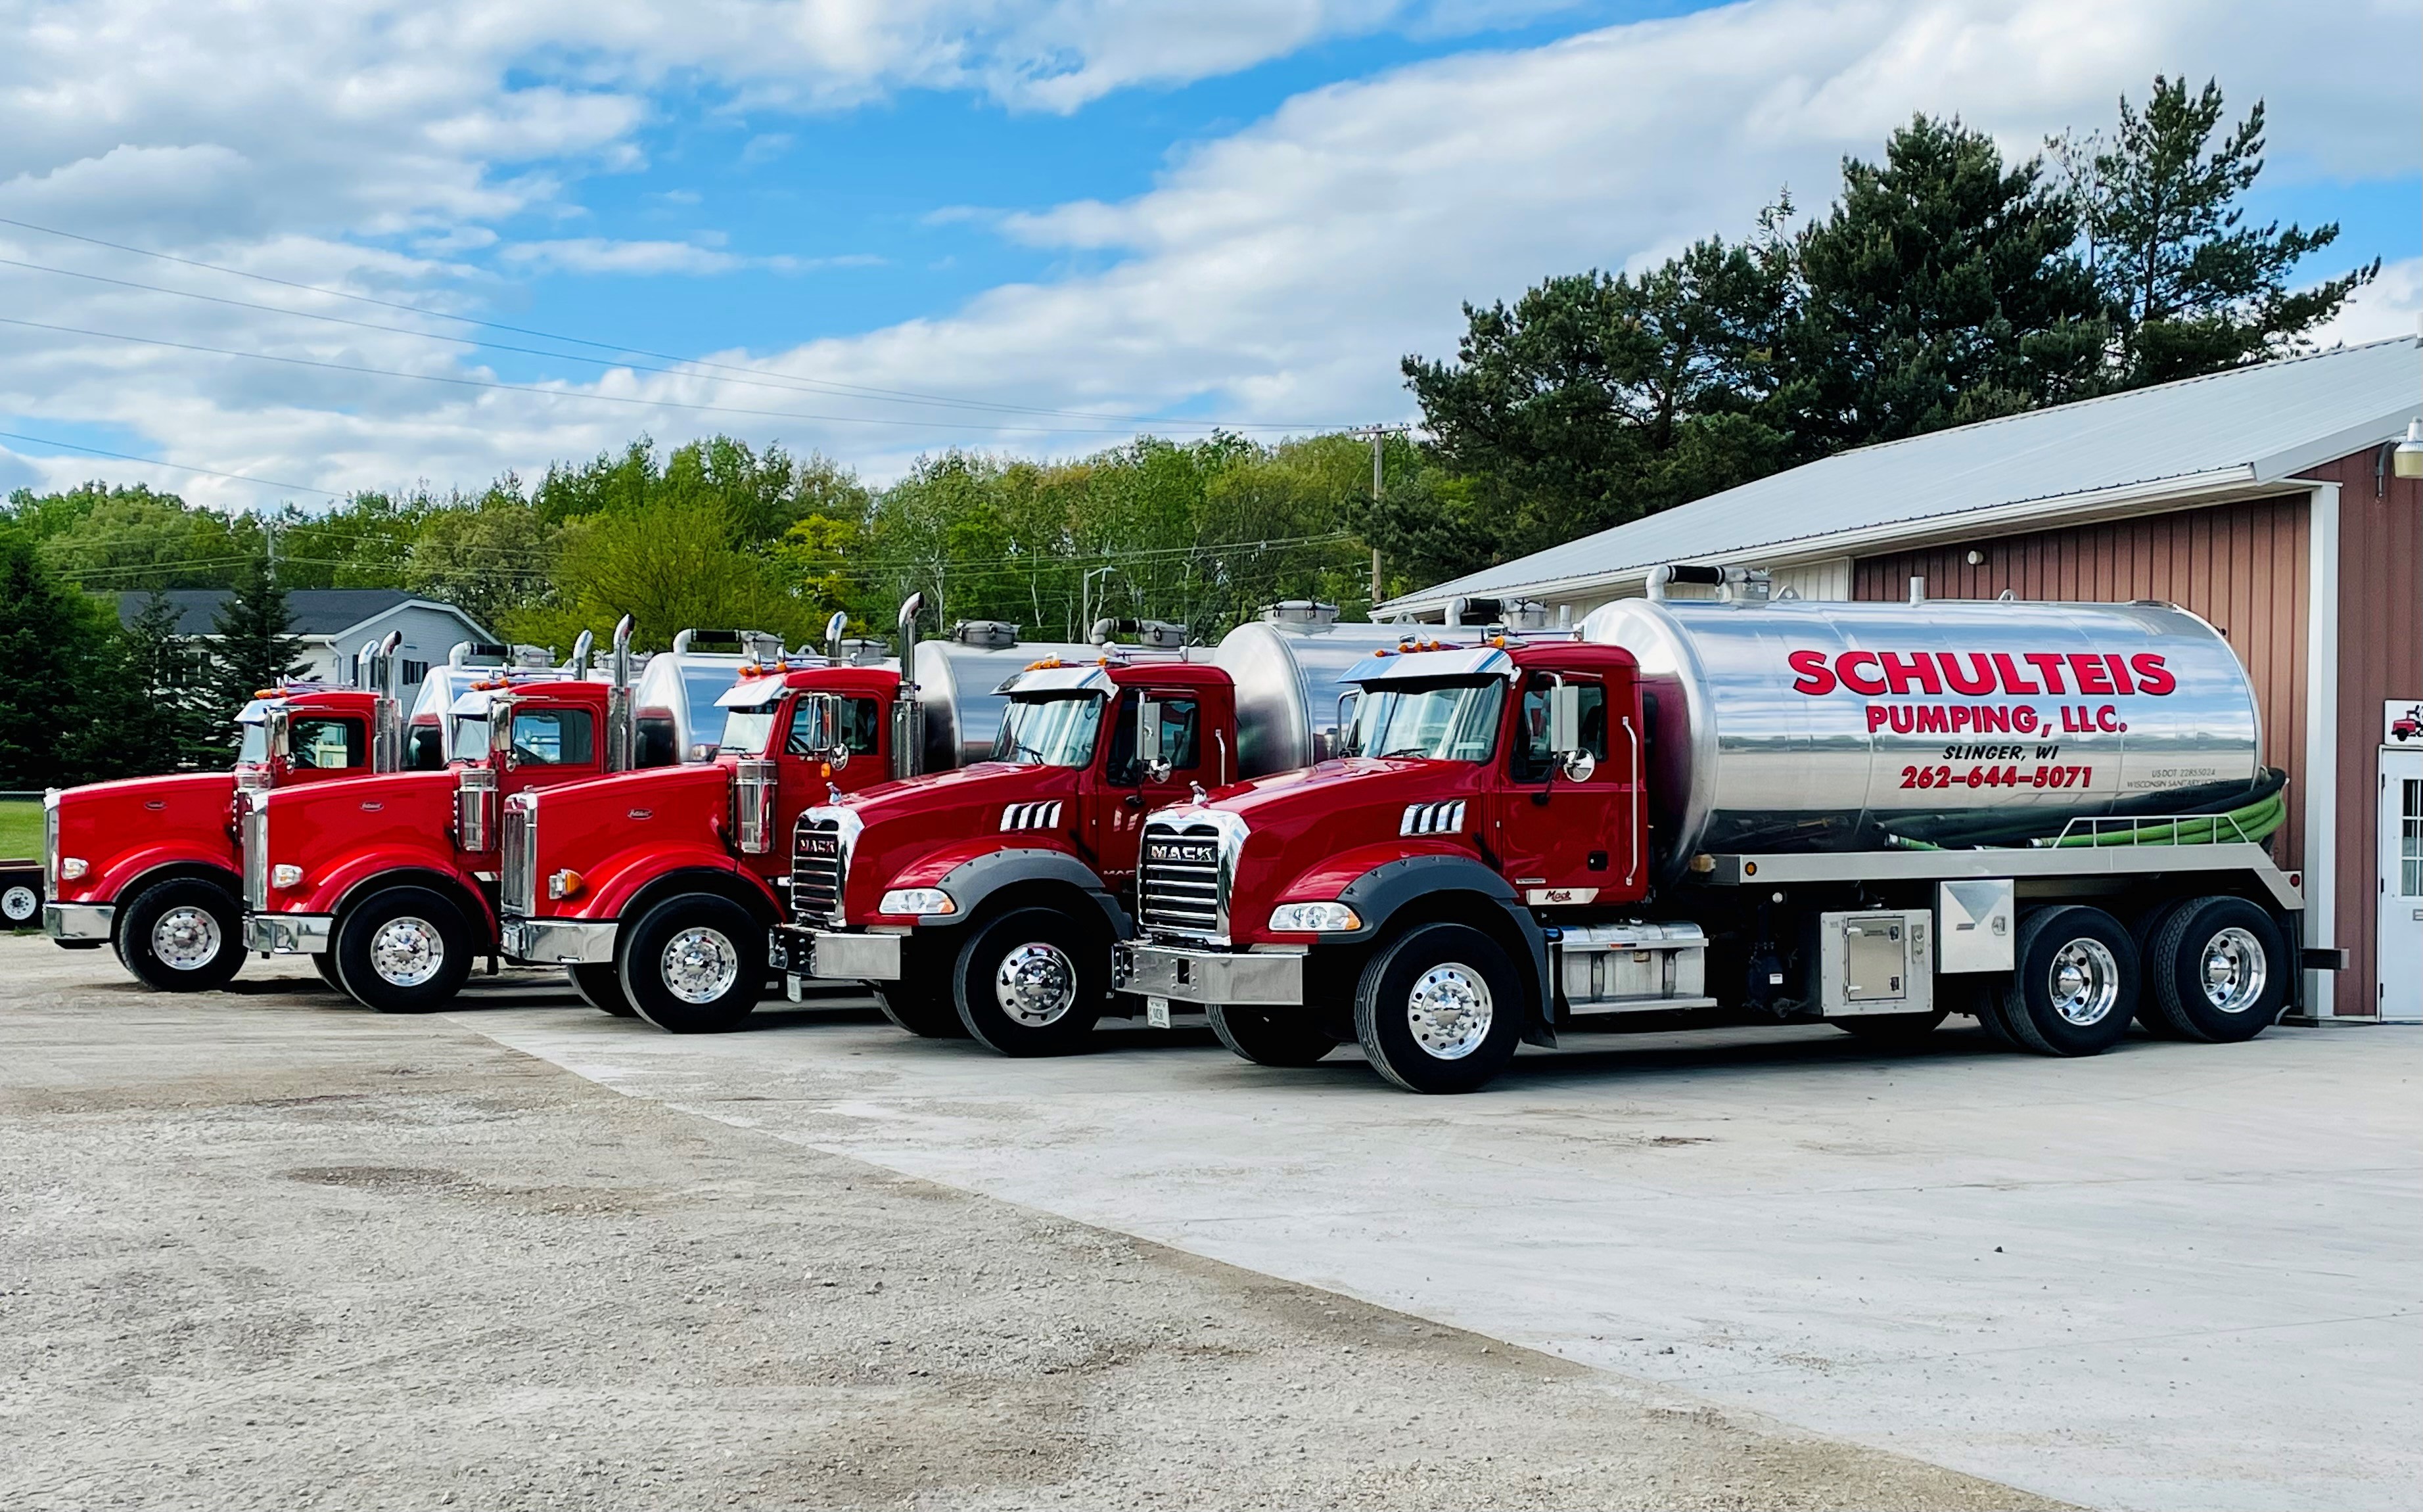 Five Schulteis Pumping trucks lined up in a row.